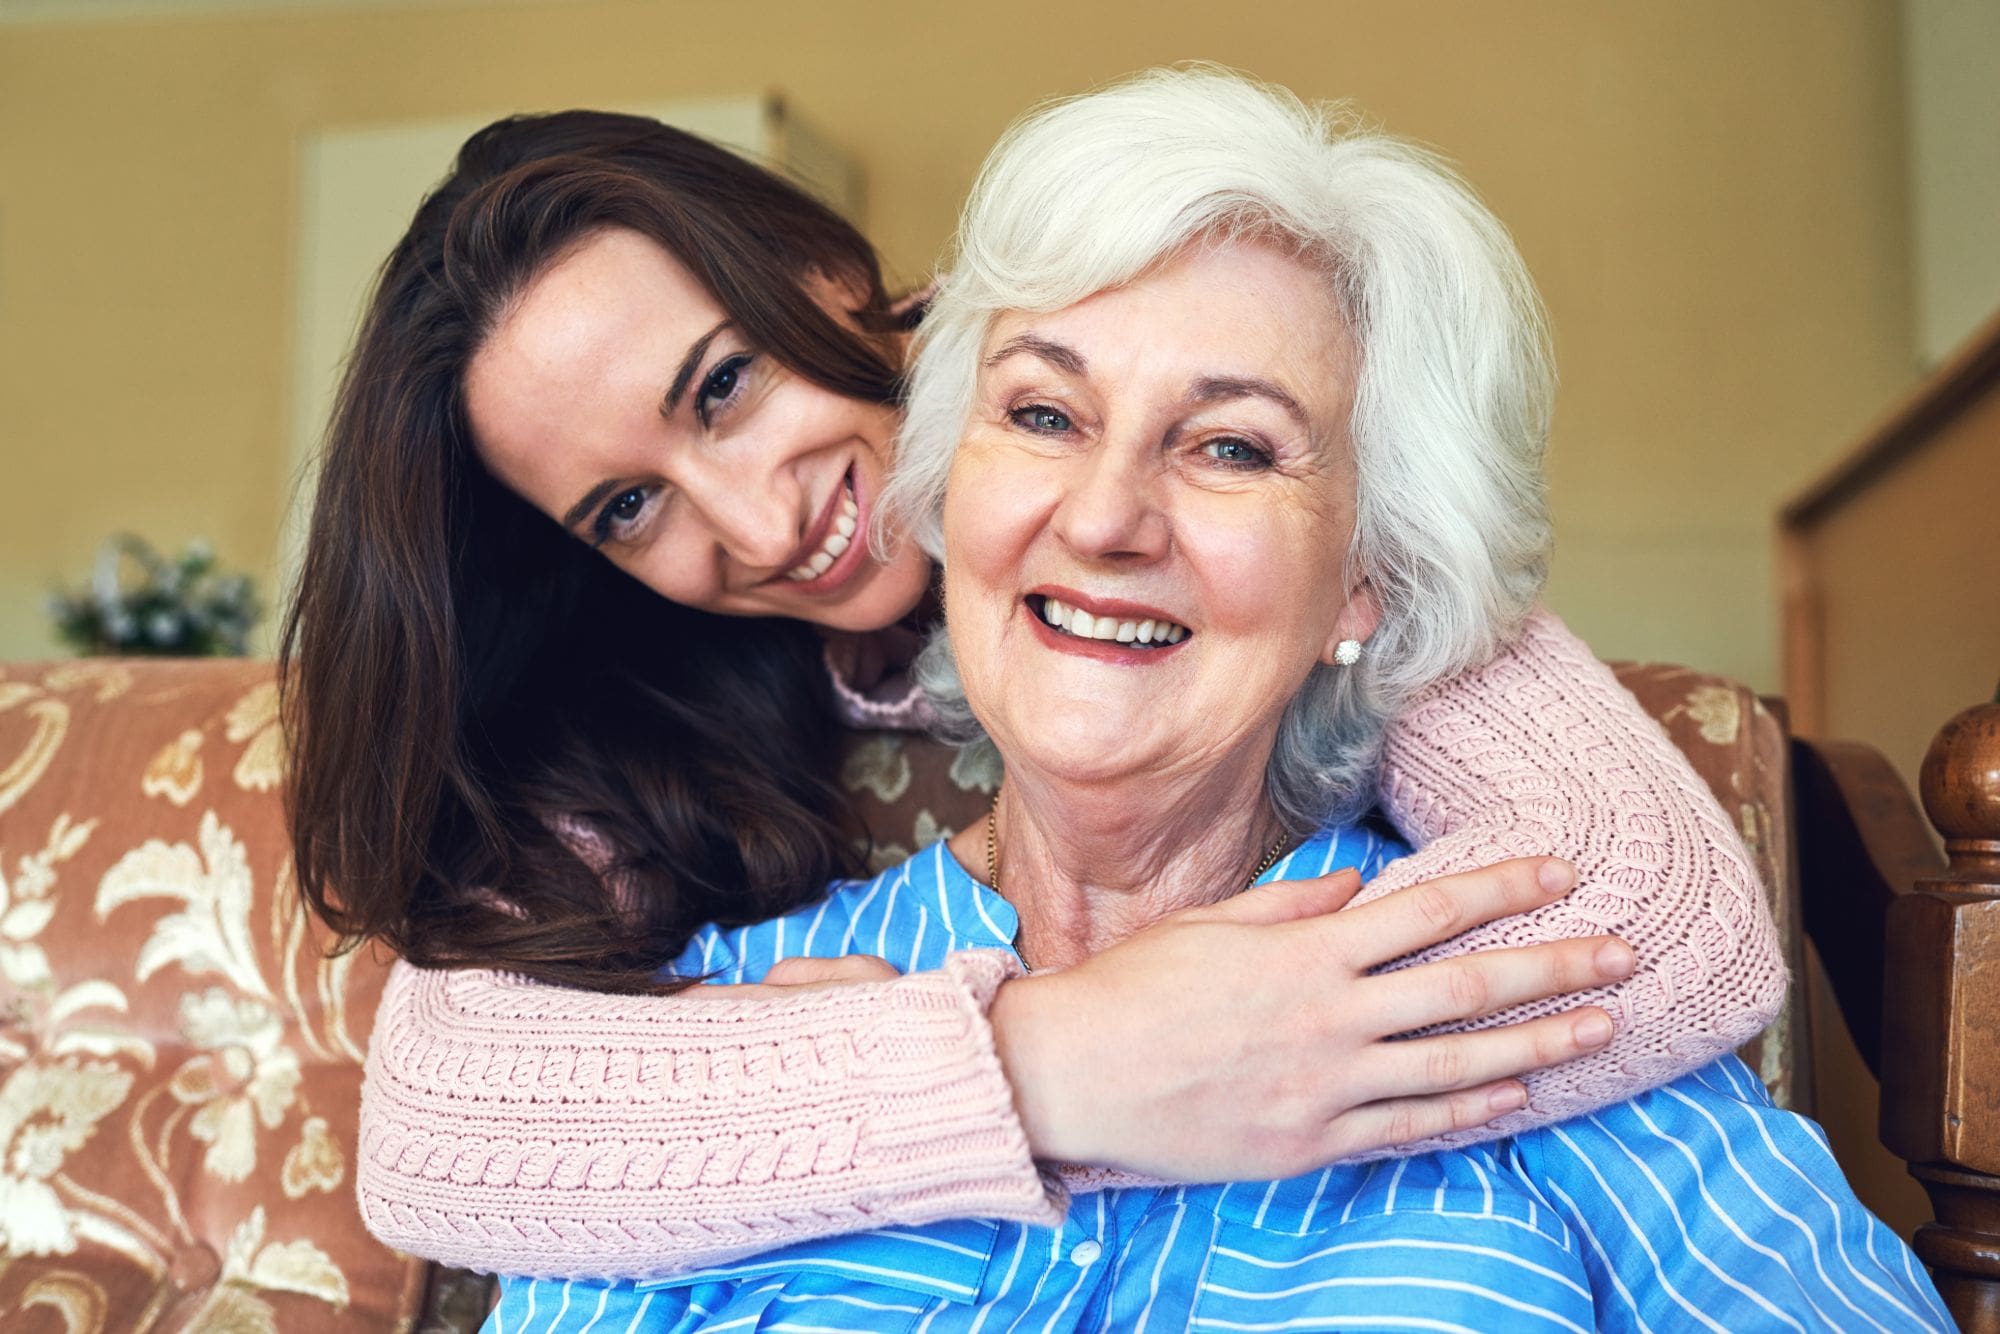 Young woman stands behind a seated senior living resident and hugs her around the neck as they both smile